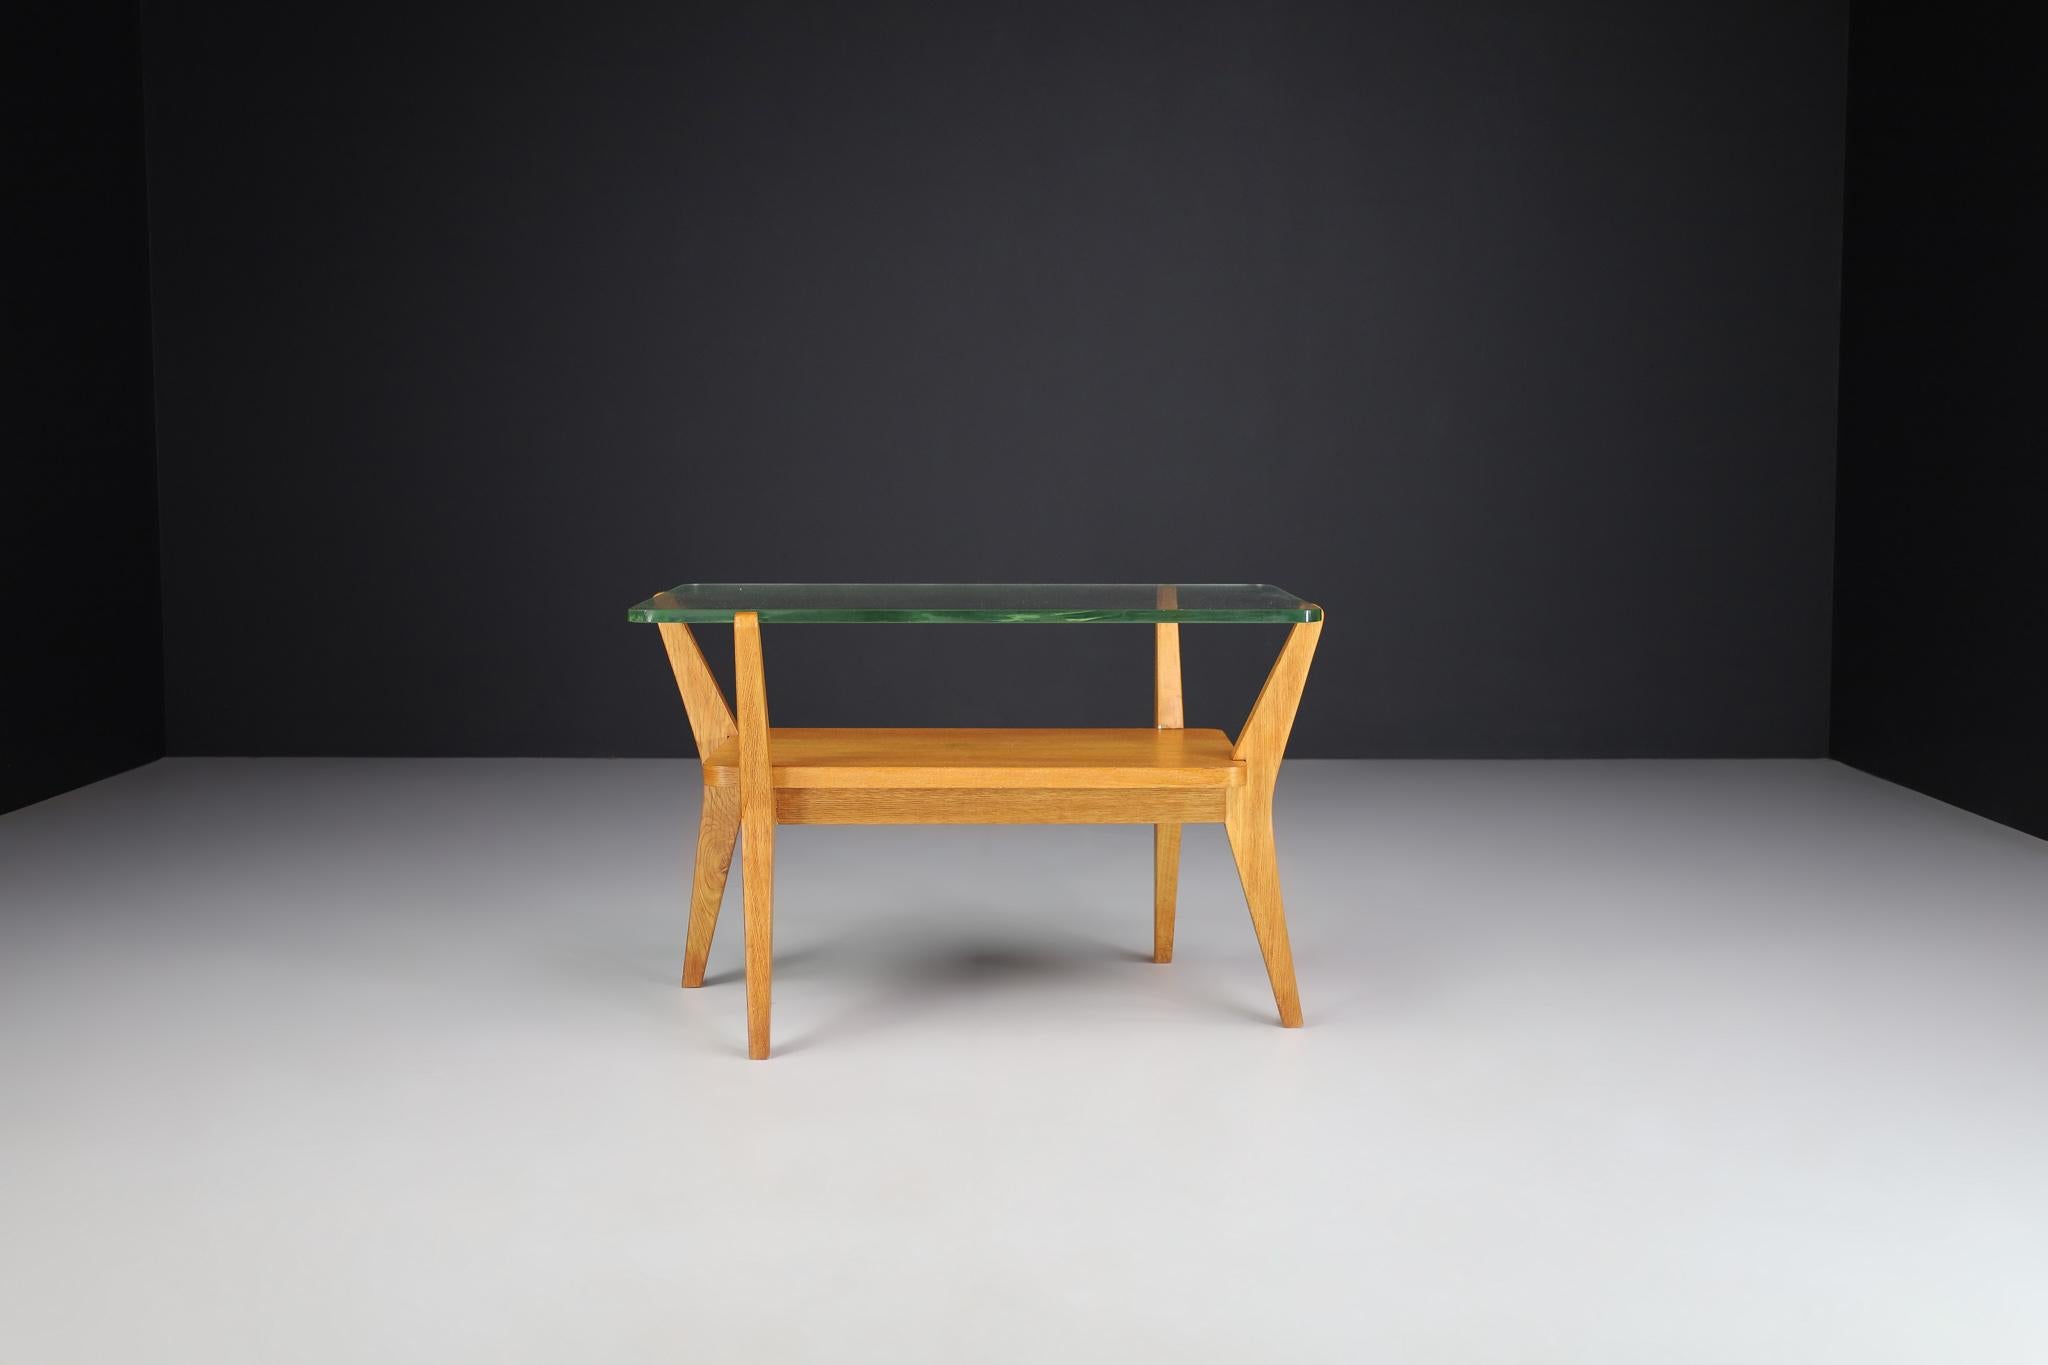 Czech Mid-Century Modern Ash Wood and Glass Coffee Table, Praque, 1950s For Sale